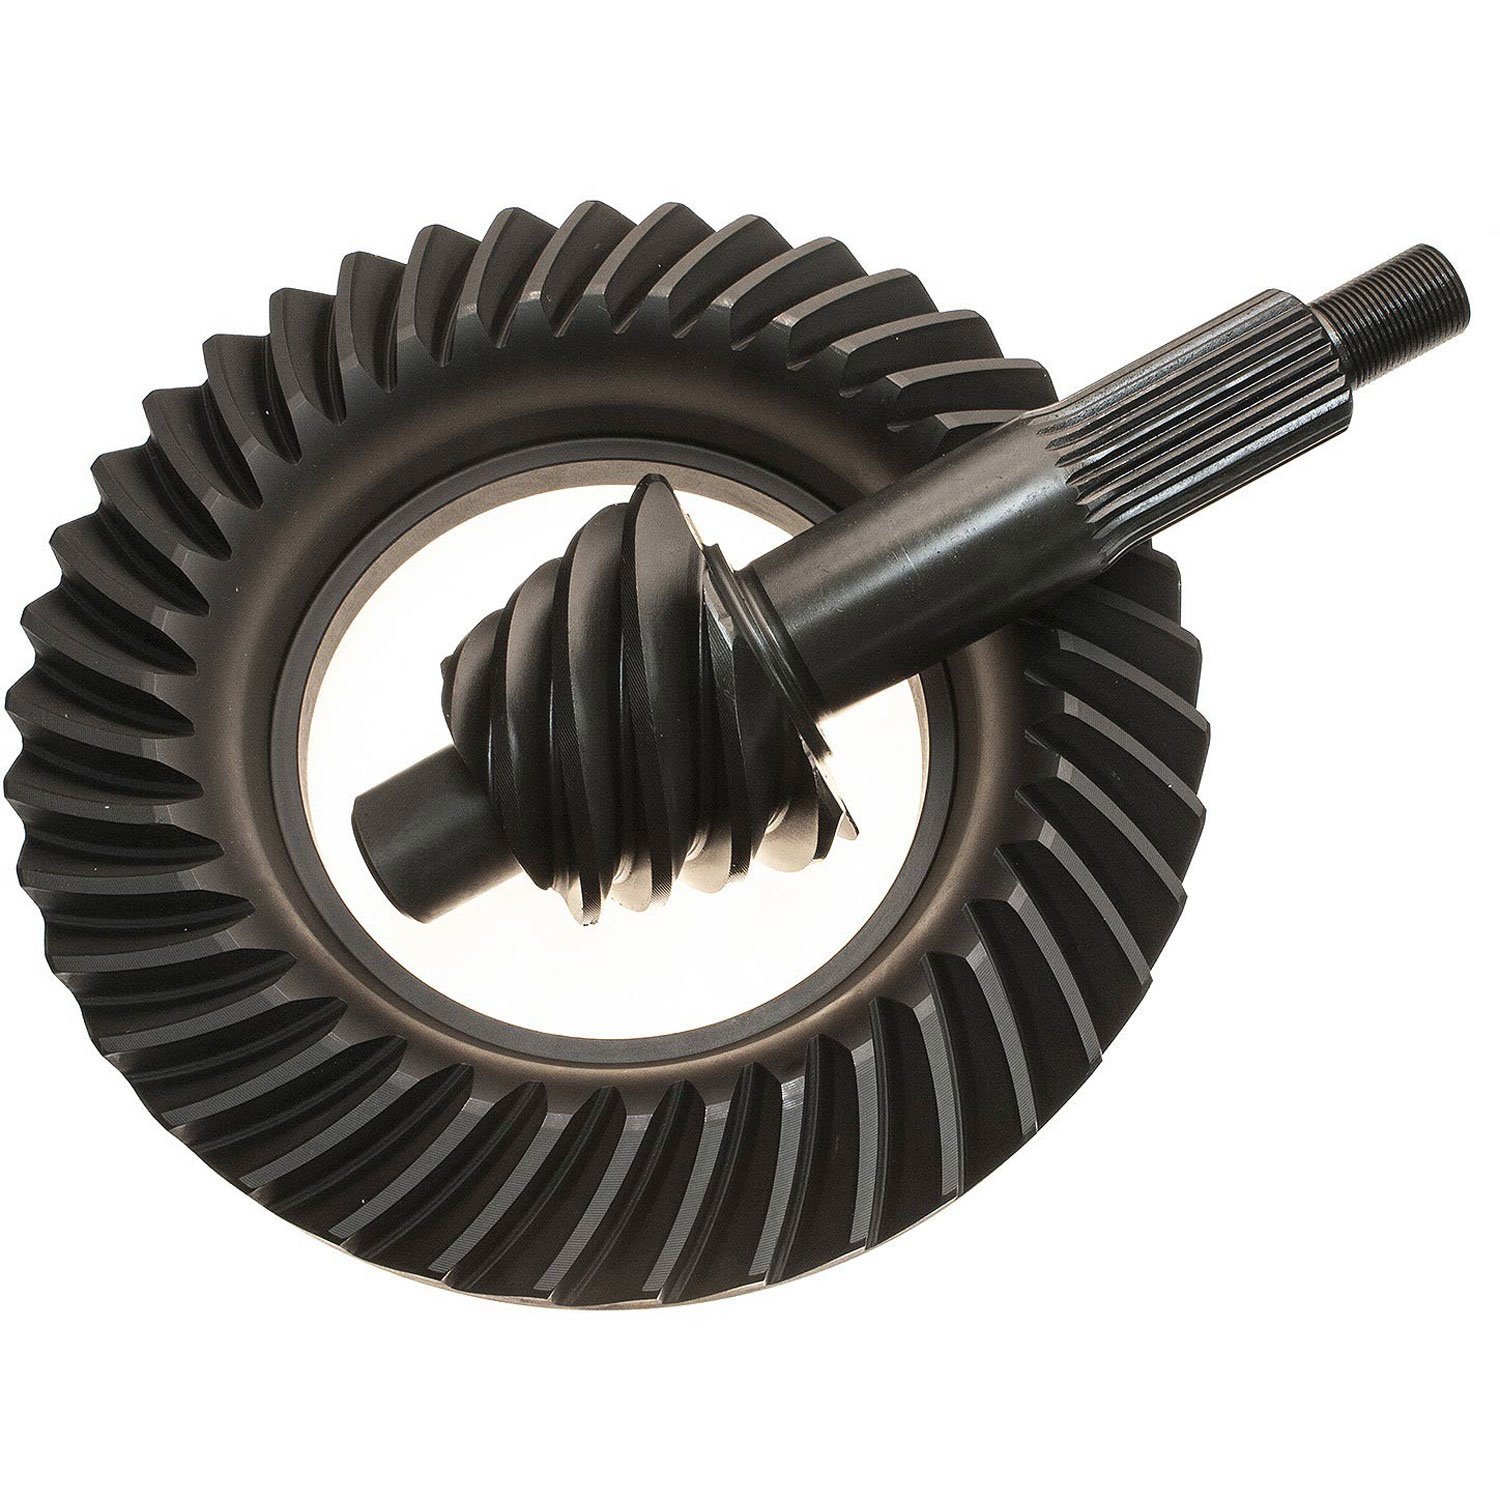 Lightened Gears Ring and Pinion Set Fits Ford